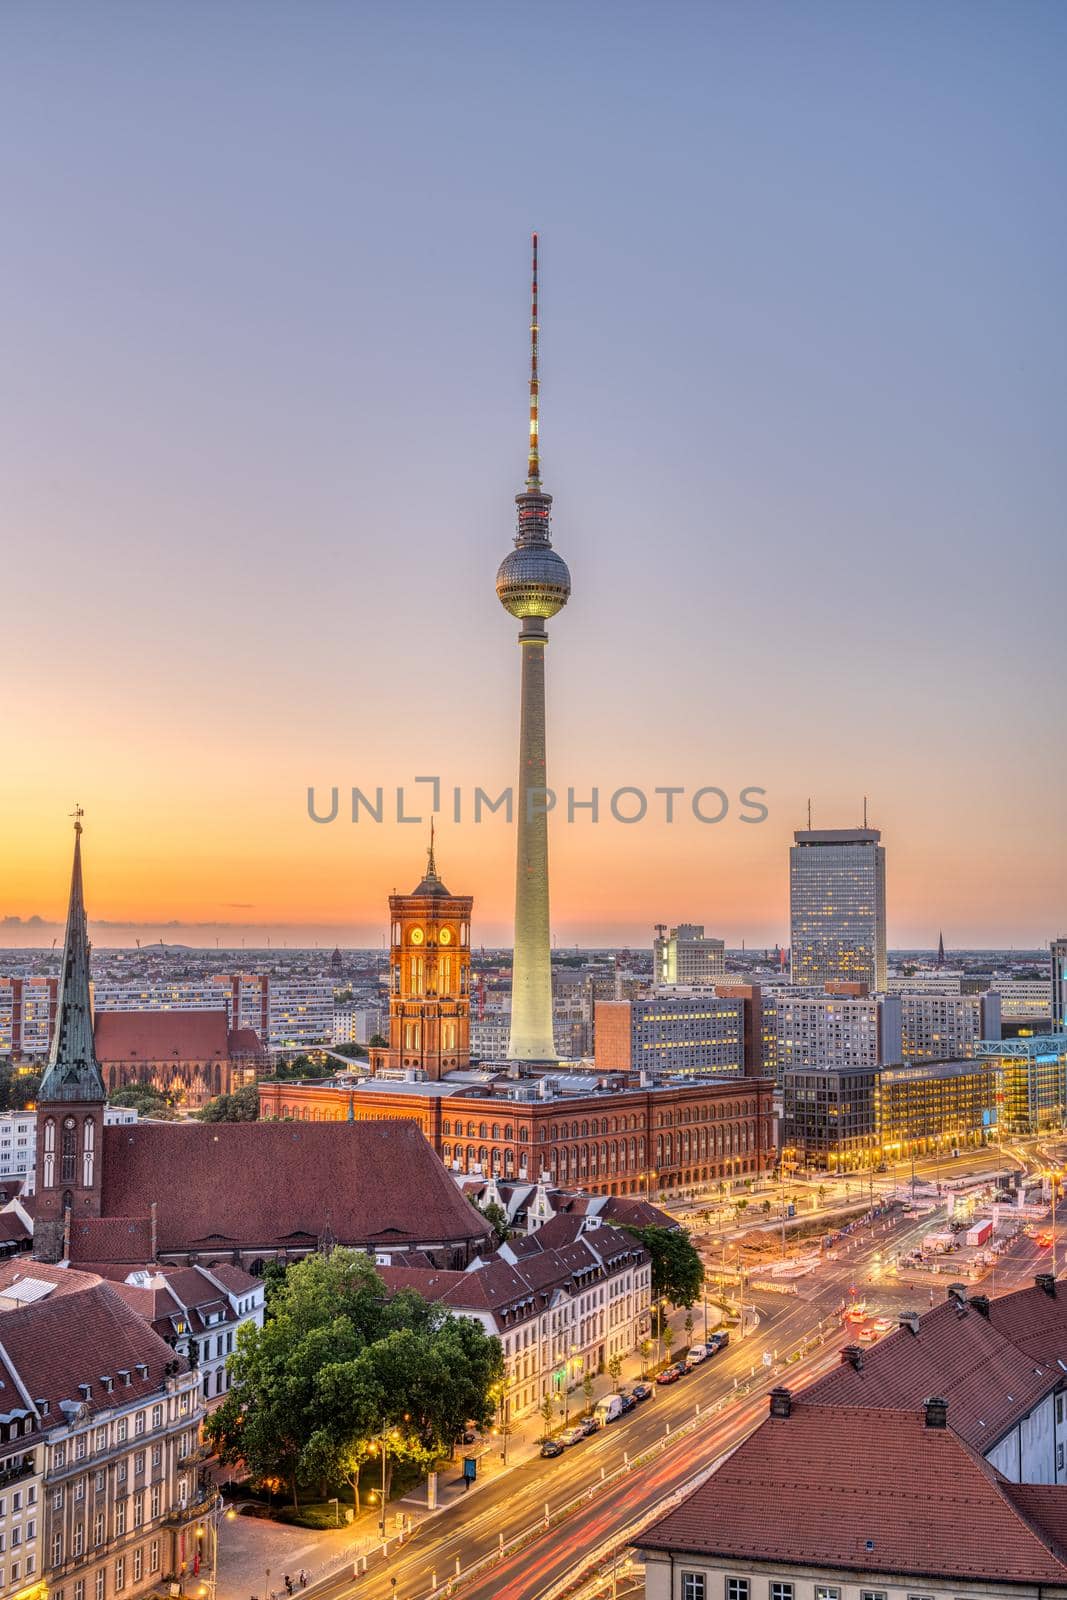 The famous TV Tower and downtown Berlin after sunset